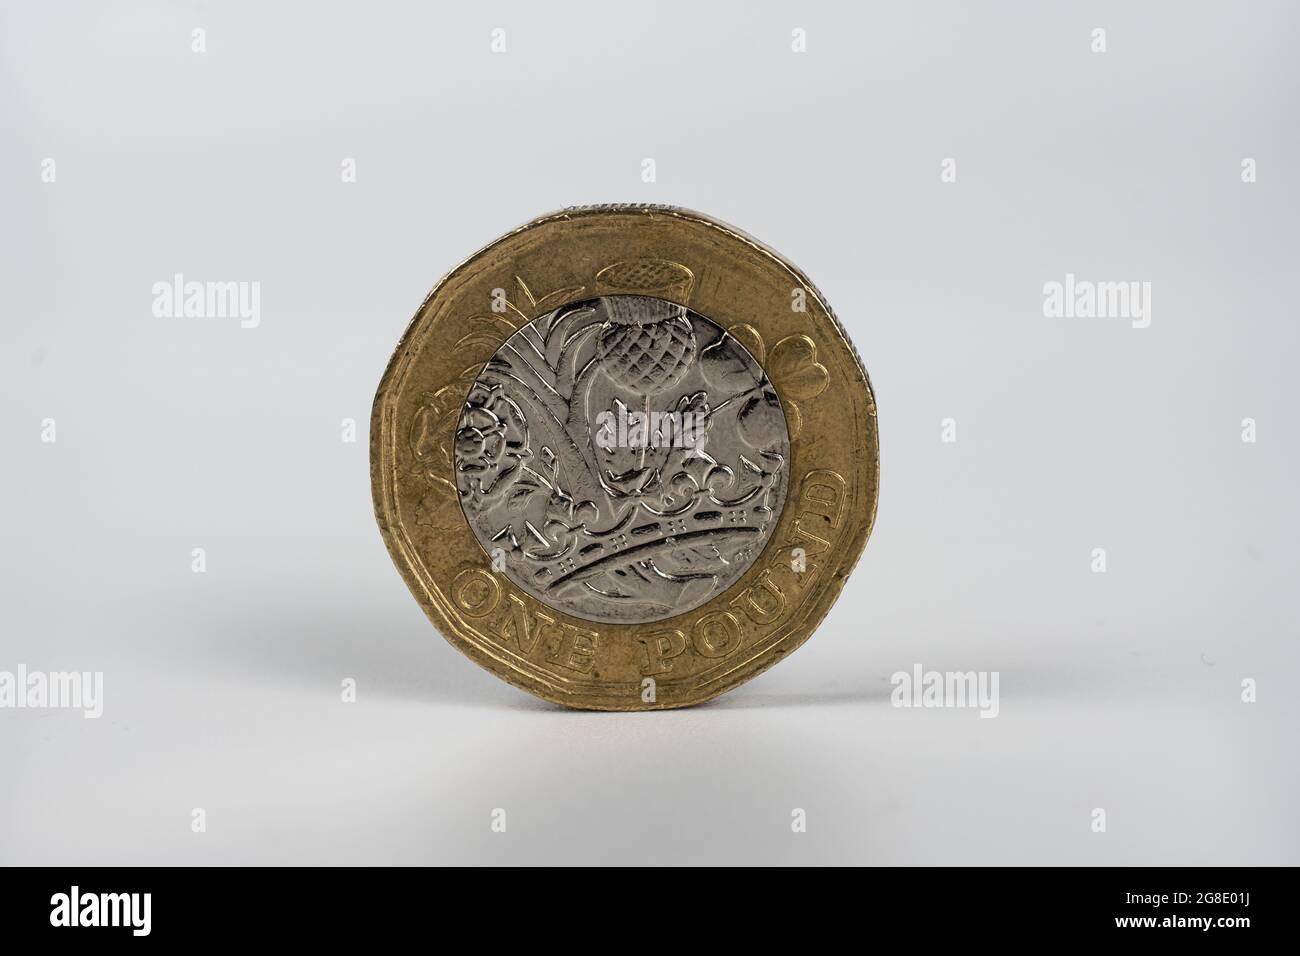 British one pound coin macro photo. Coin withn the signs of circulation, worn state. Isolated on white. Stock Photo